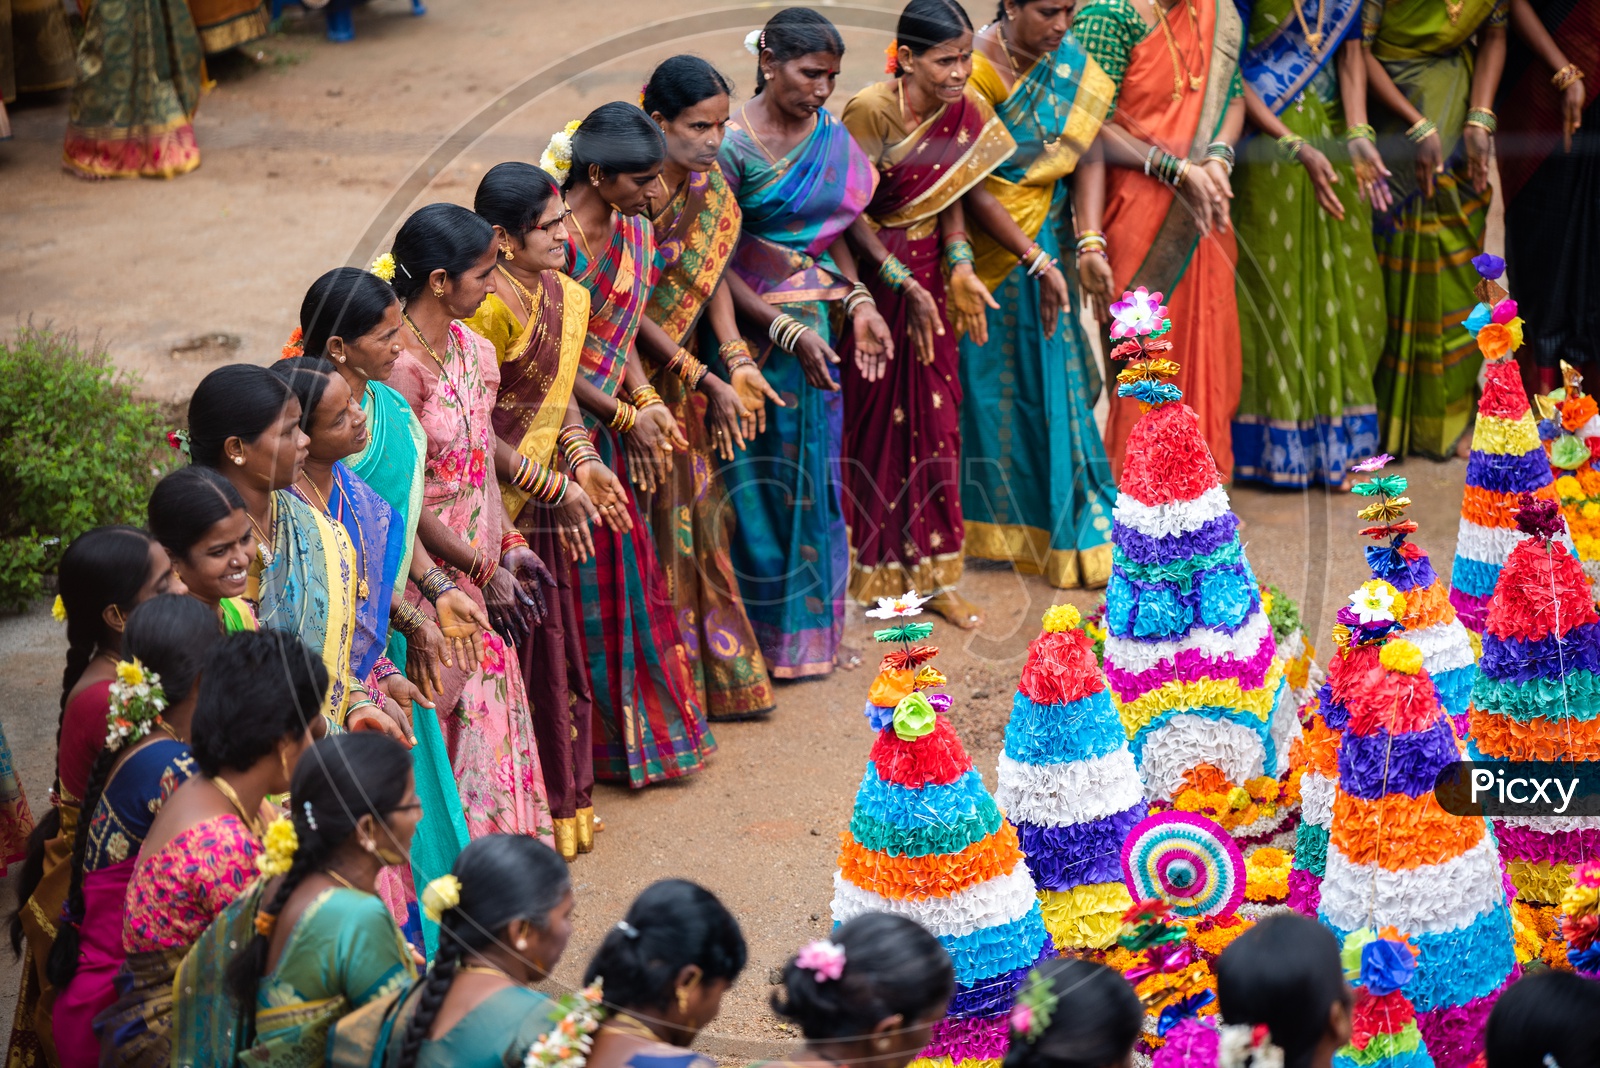 Women Of Telangana Celebrate Bathukamma A Floral Decoration Made From Medicinal Flowers And Fragrances Arranged Like A Temple Gopuram